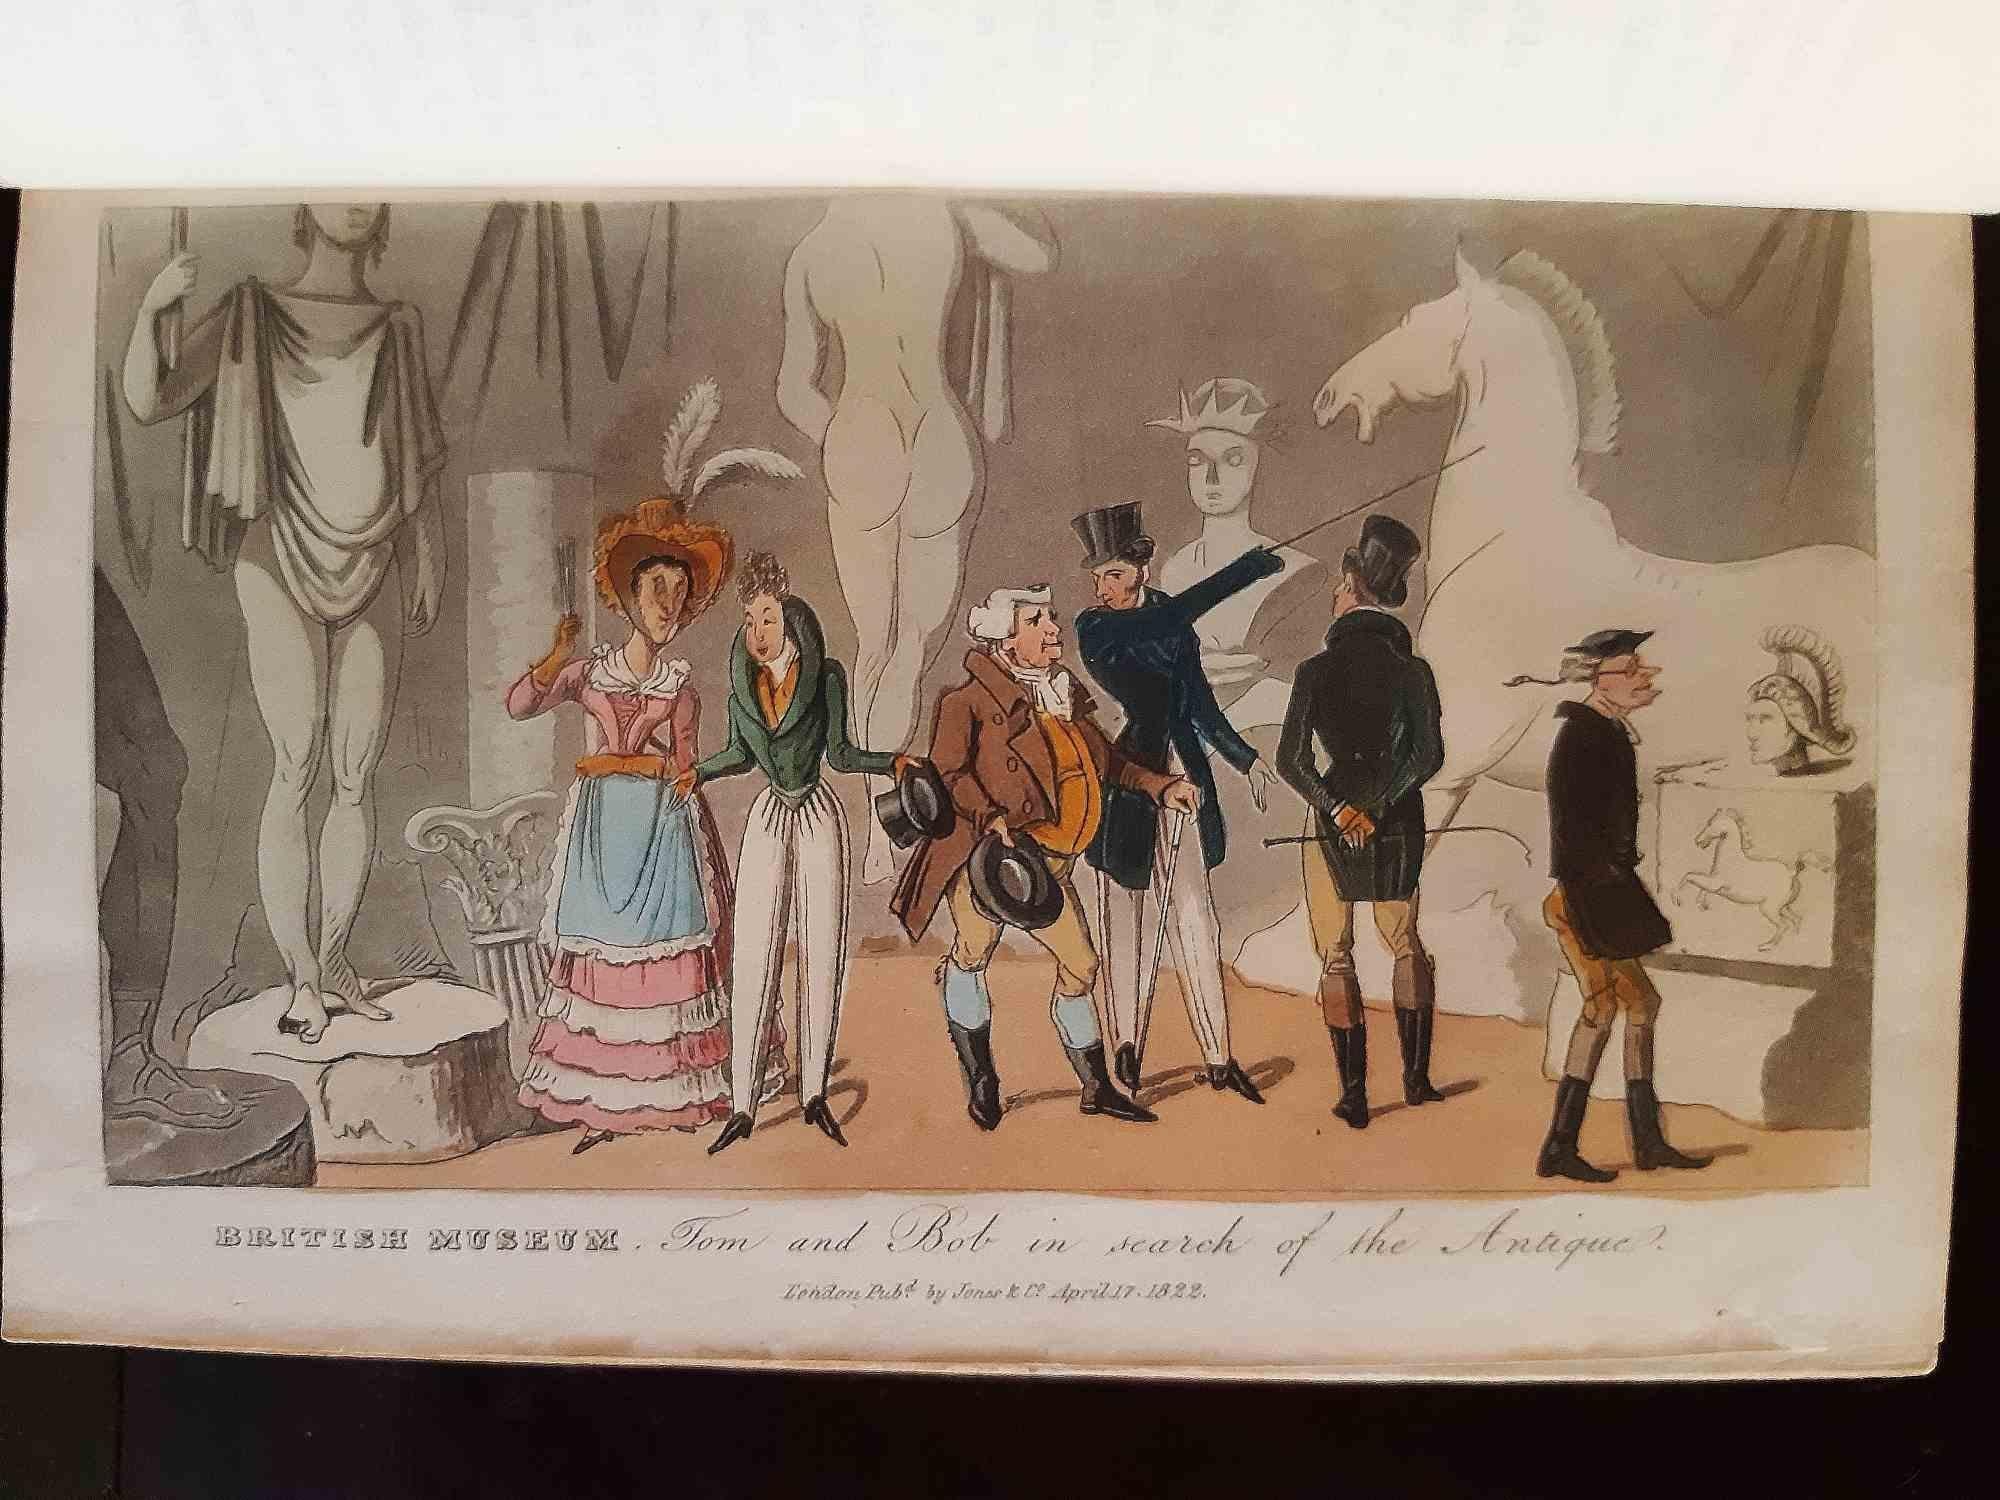 Real Life in London - Rare Book Illustrated by T. Rowlandson - 1820s - Art by Thomas Rowlandson